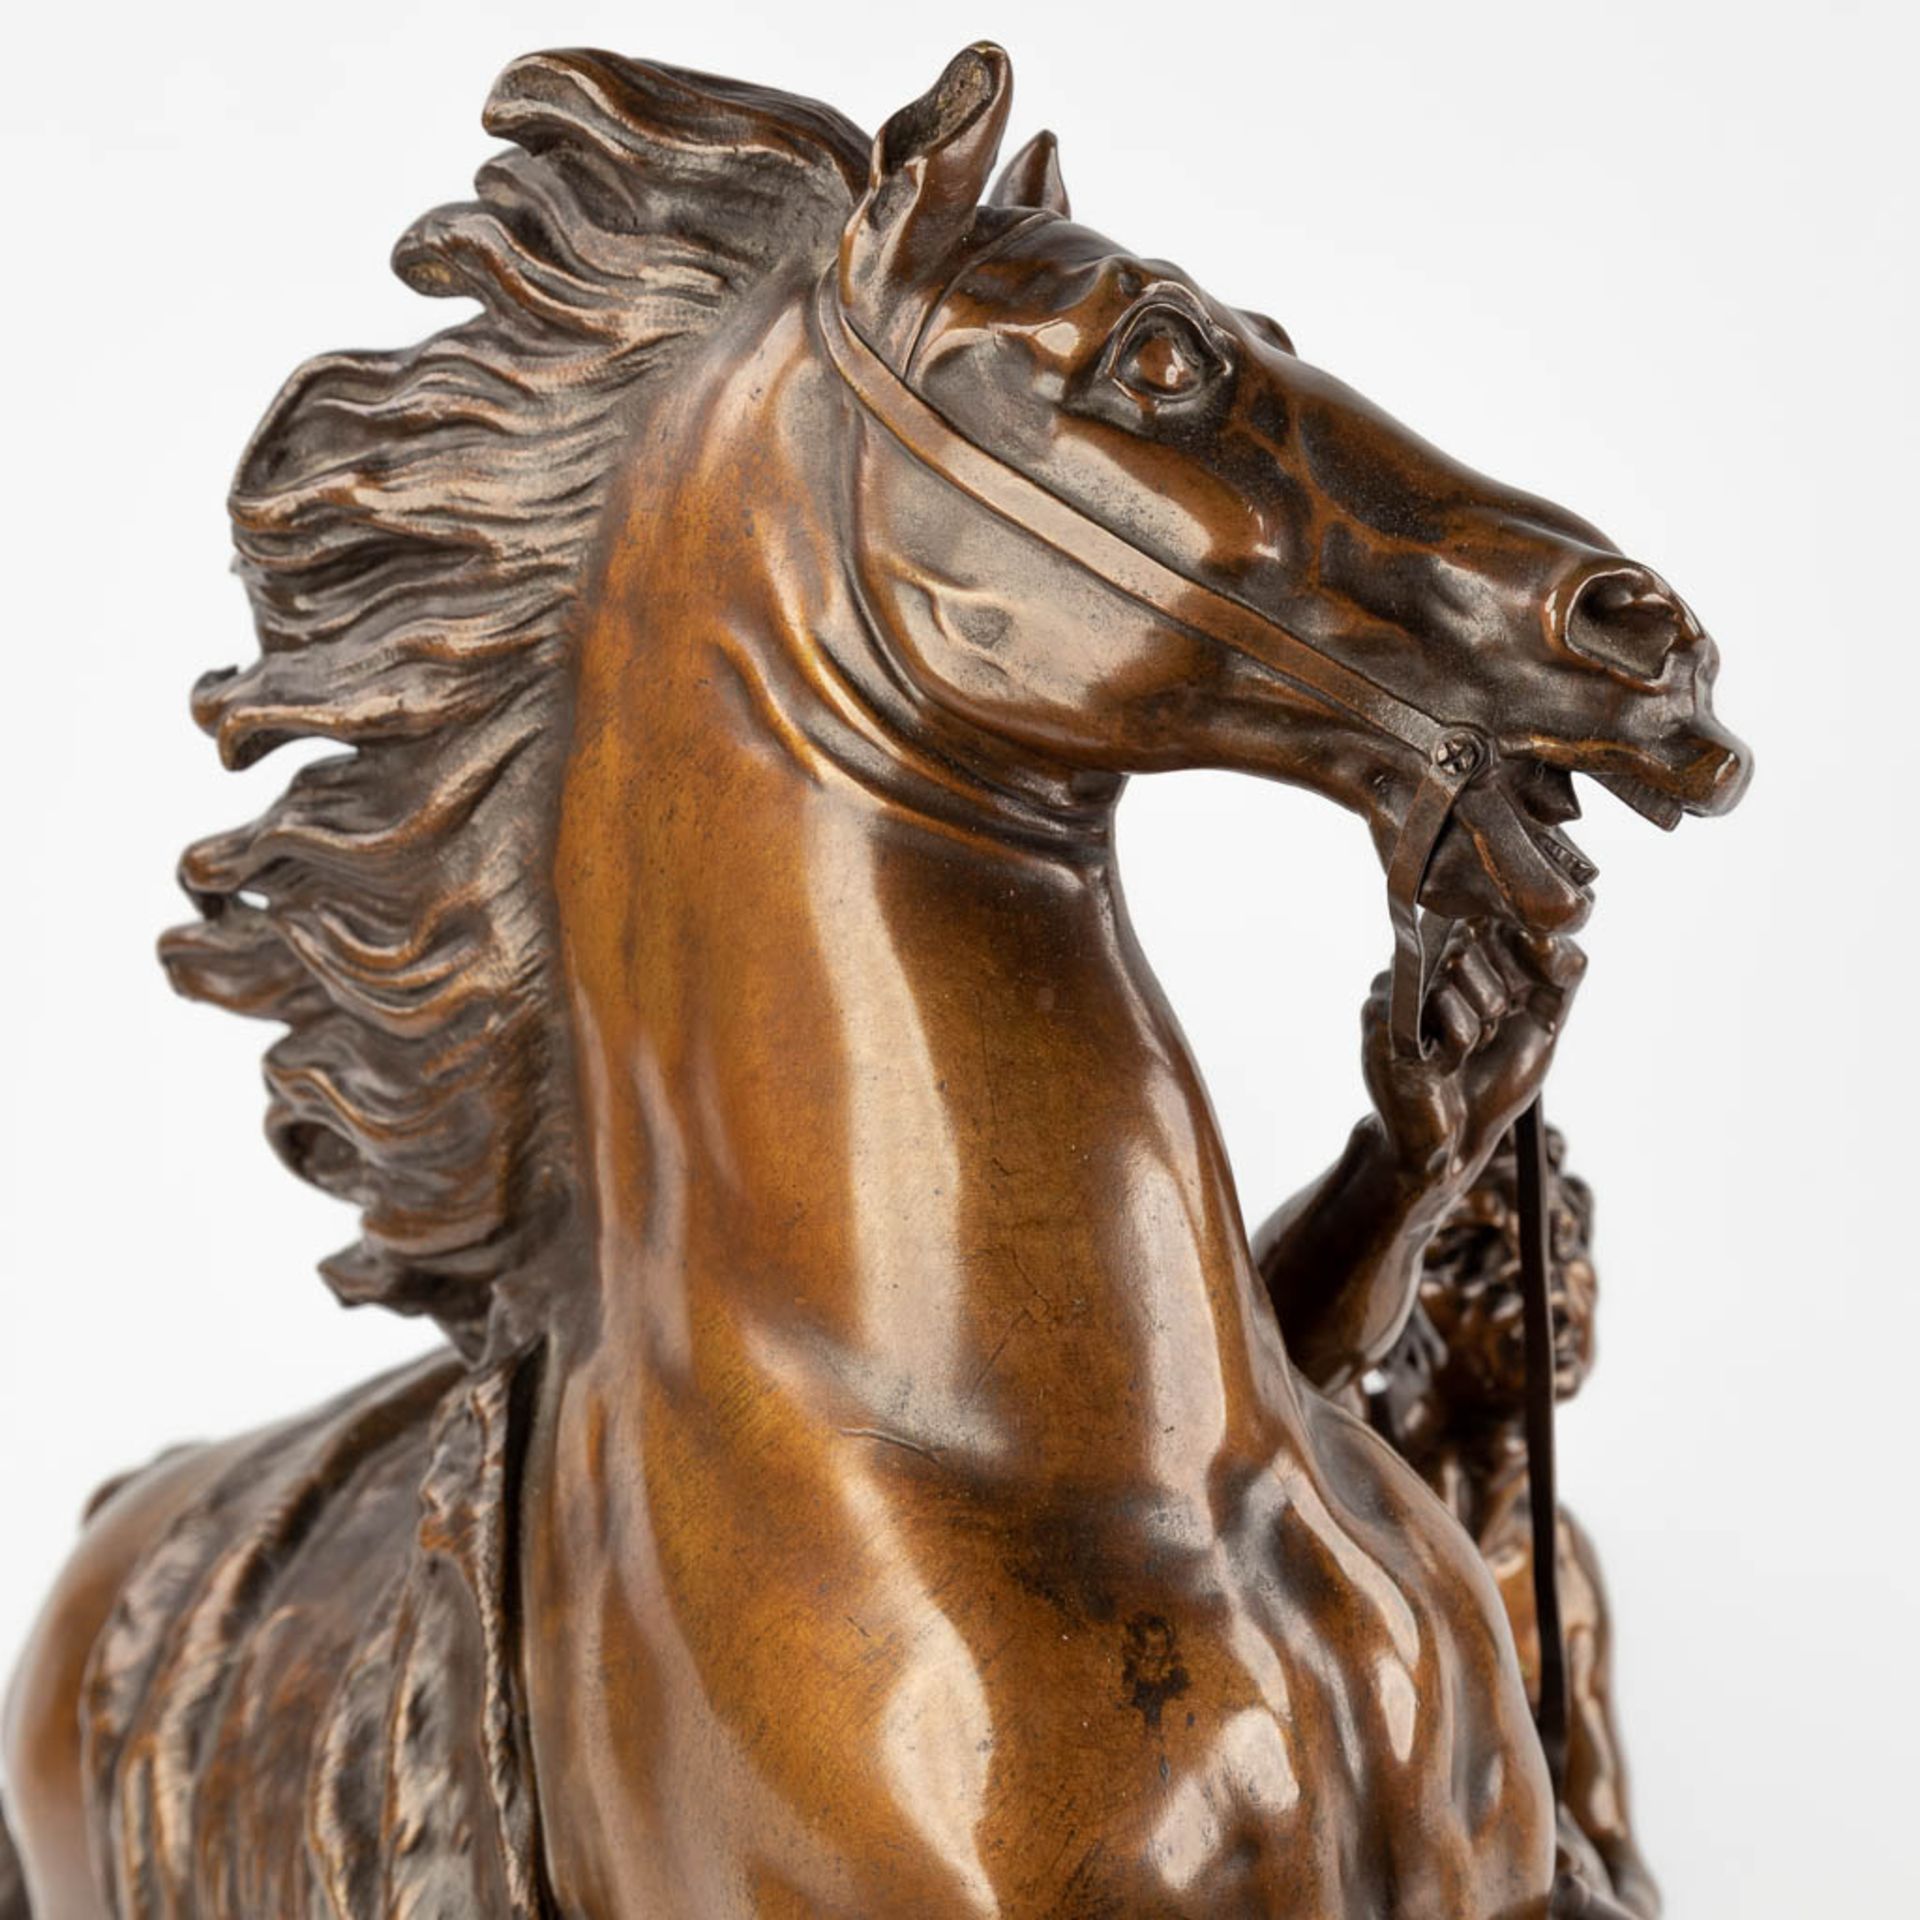 Guillaume I COUSTOU (1677-1746)(after), 'Marly horse' patinated bronze. (D:26 x W:56 x H:58 cm) - Image 11 of 12